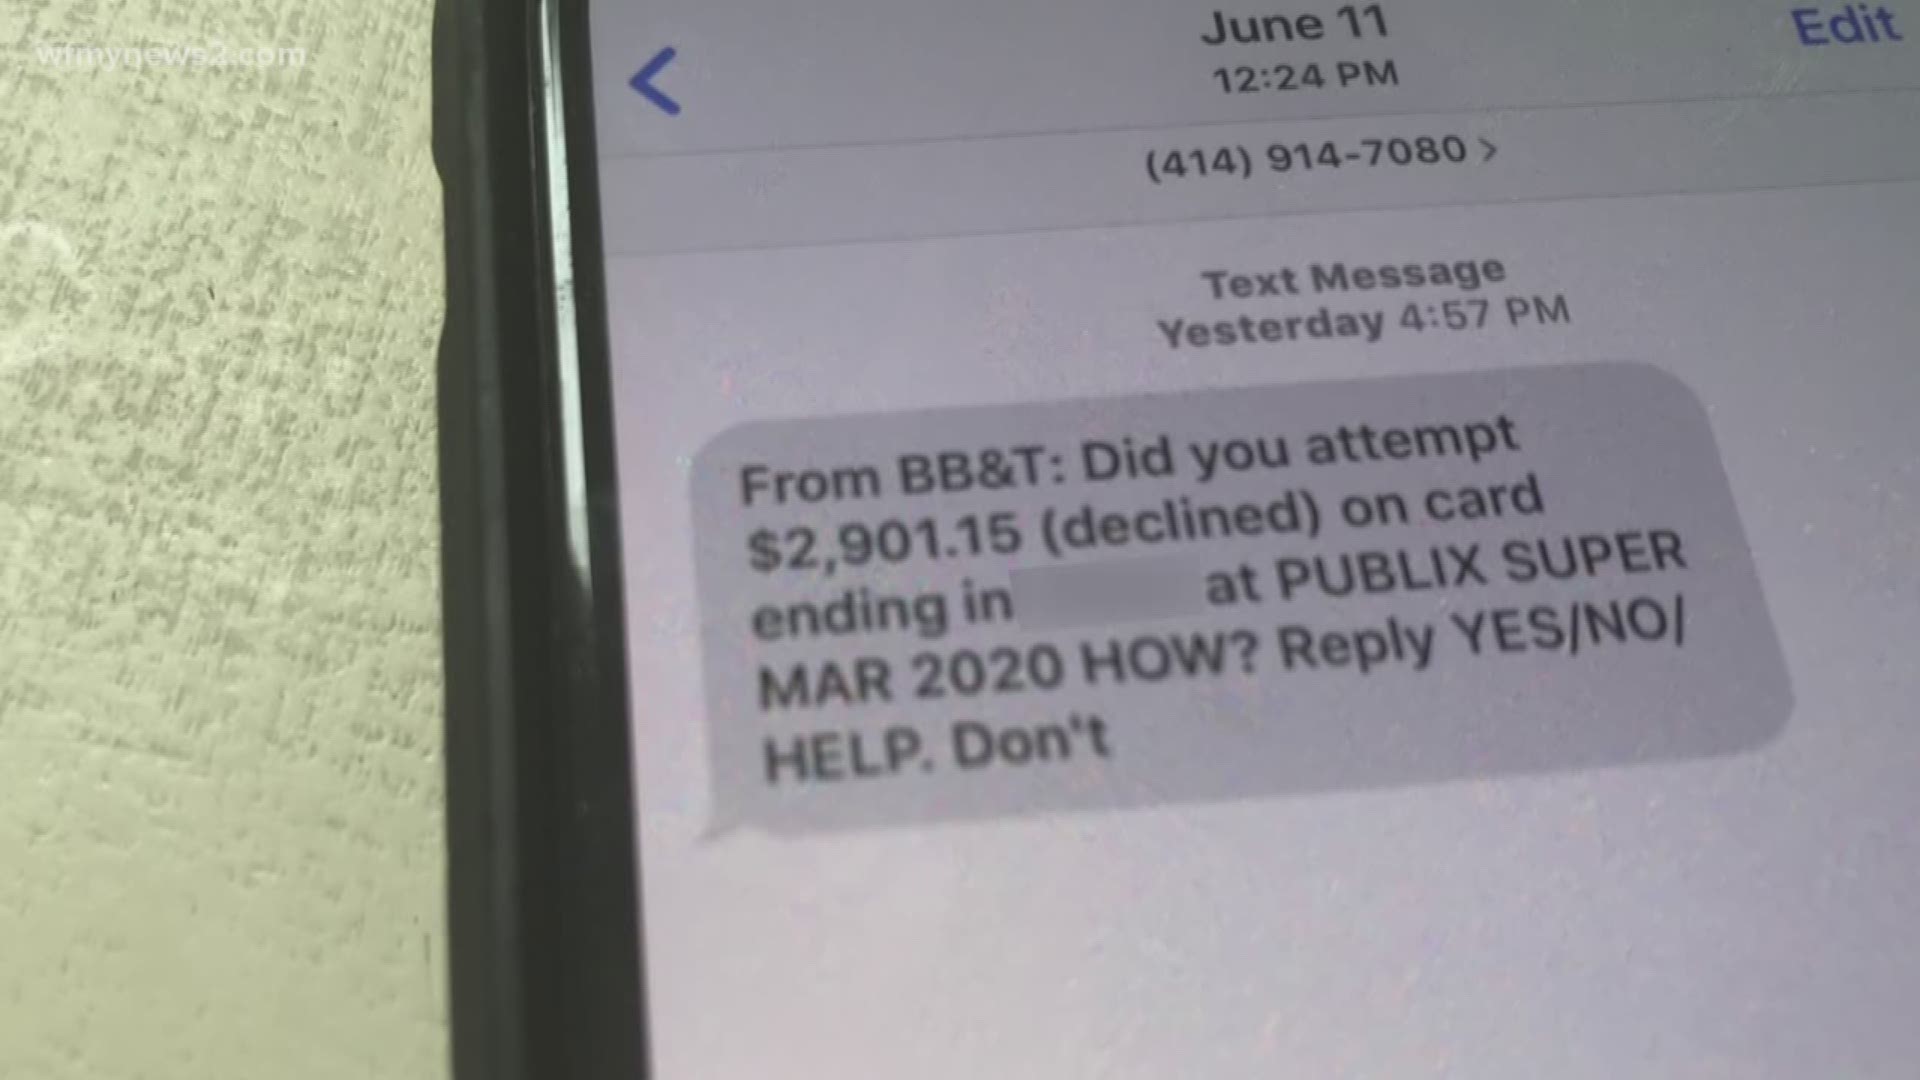 She almost lost thousands thanks to a sophisticated banking scam that started with a text.